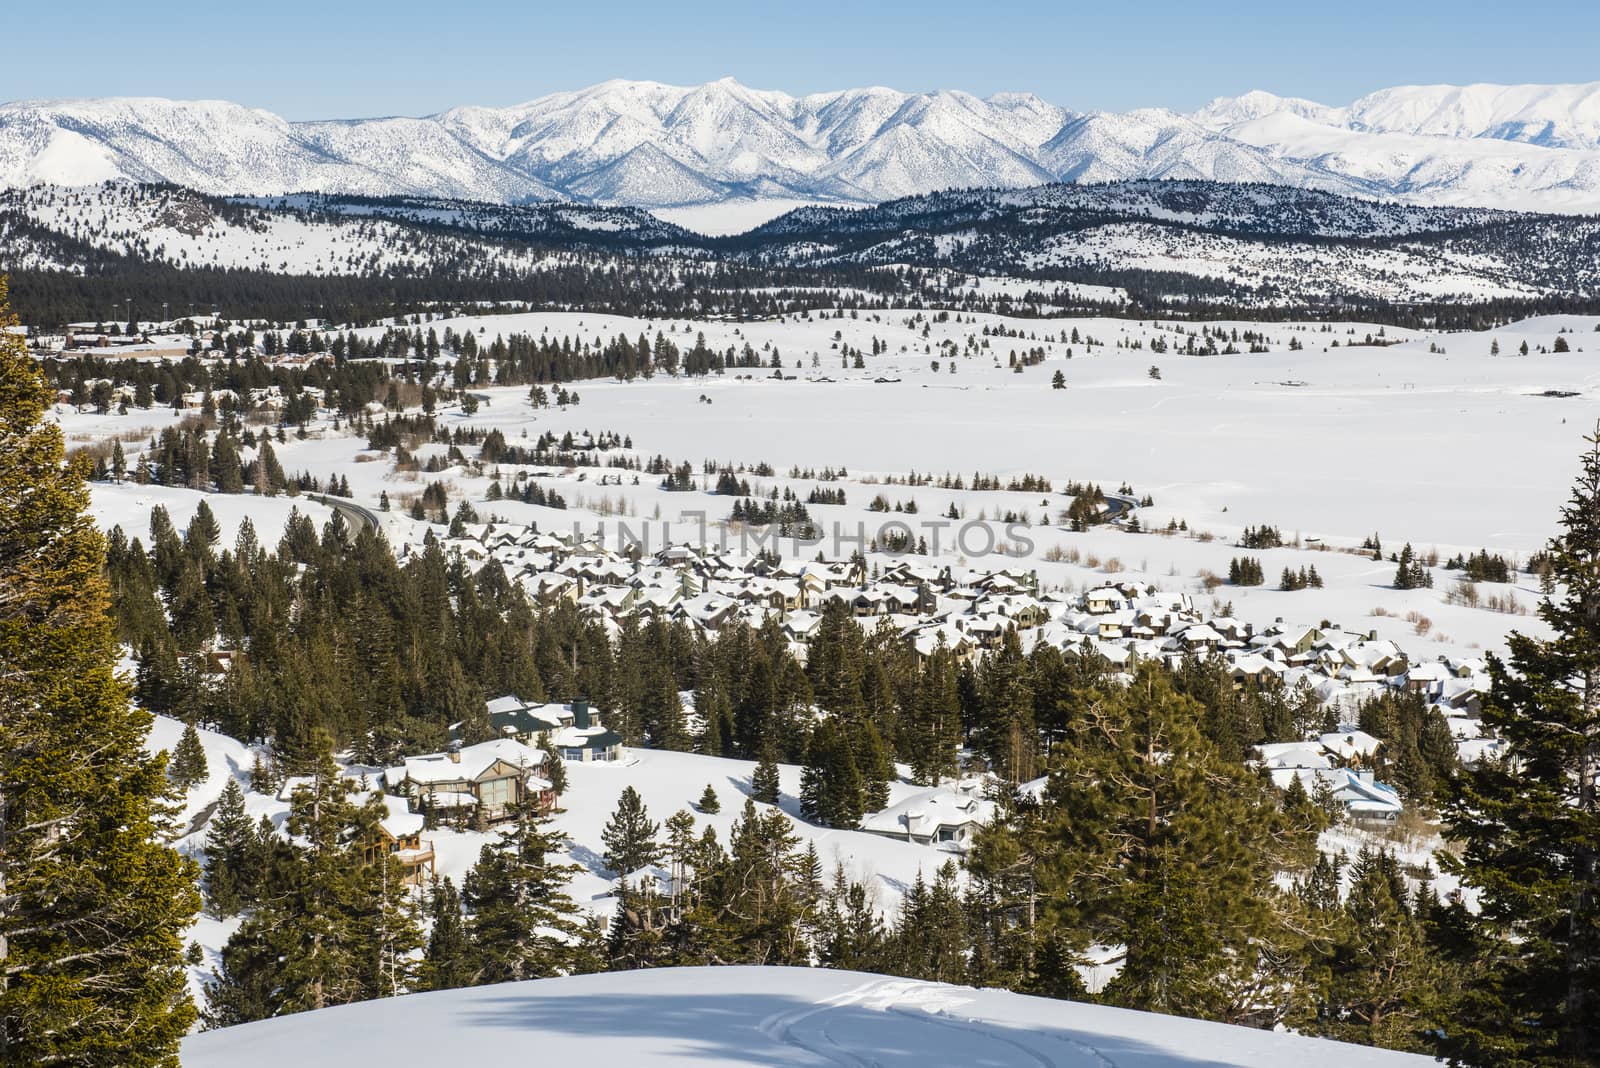 Overlooking Mammoth Lakes, California, January 2017, a record sn by Njean